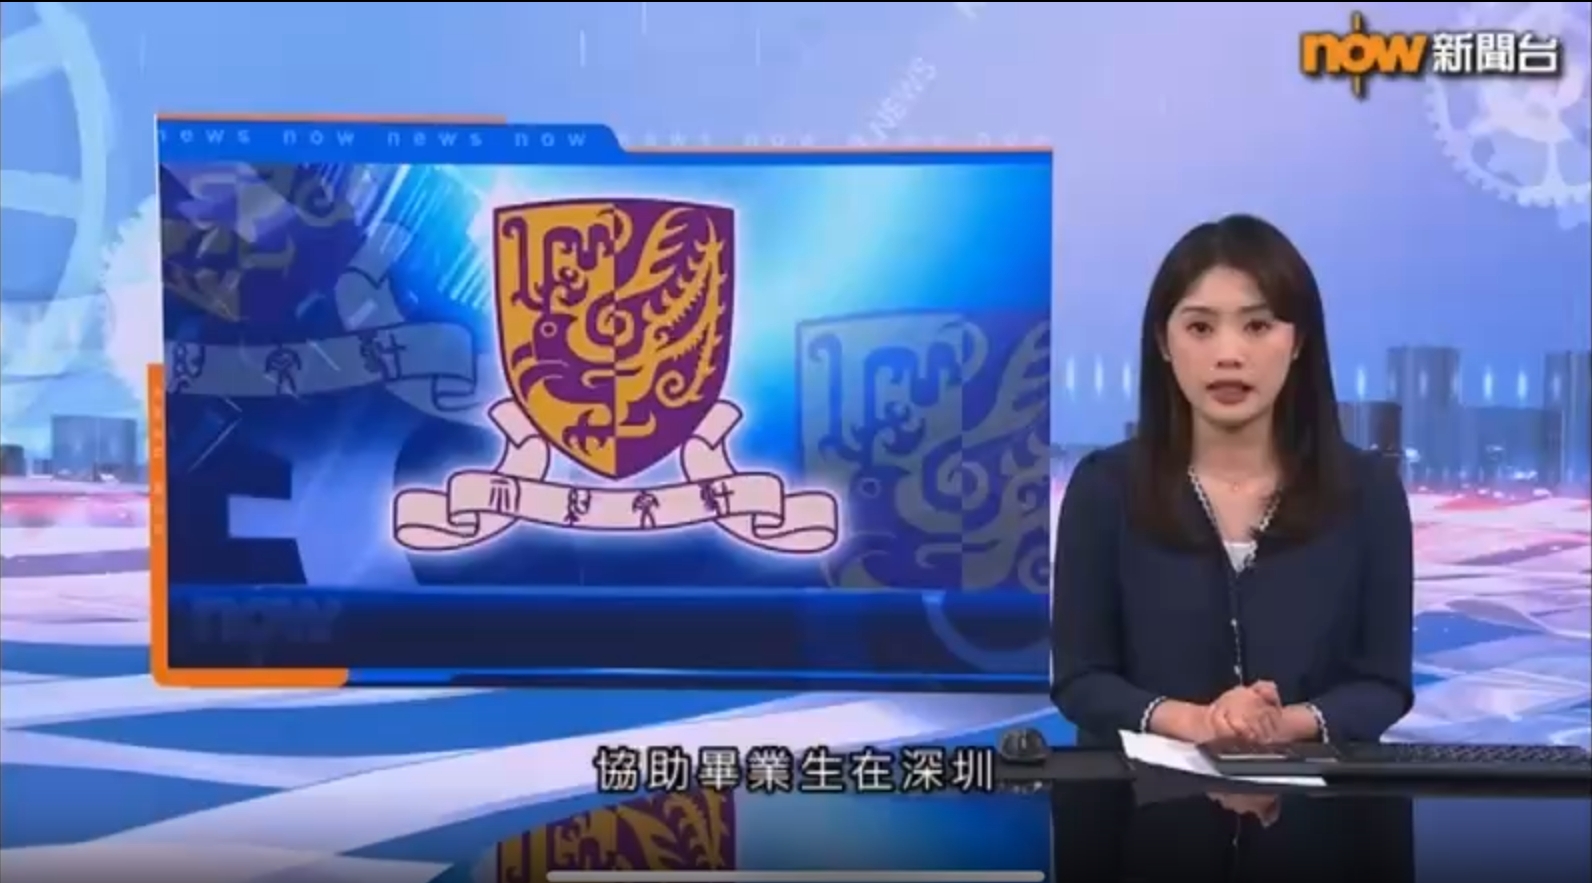 Hong Kong, China "Now news Channel" to report on GARTEC SAFETY founder Peidong Lin interview